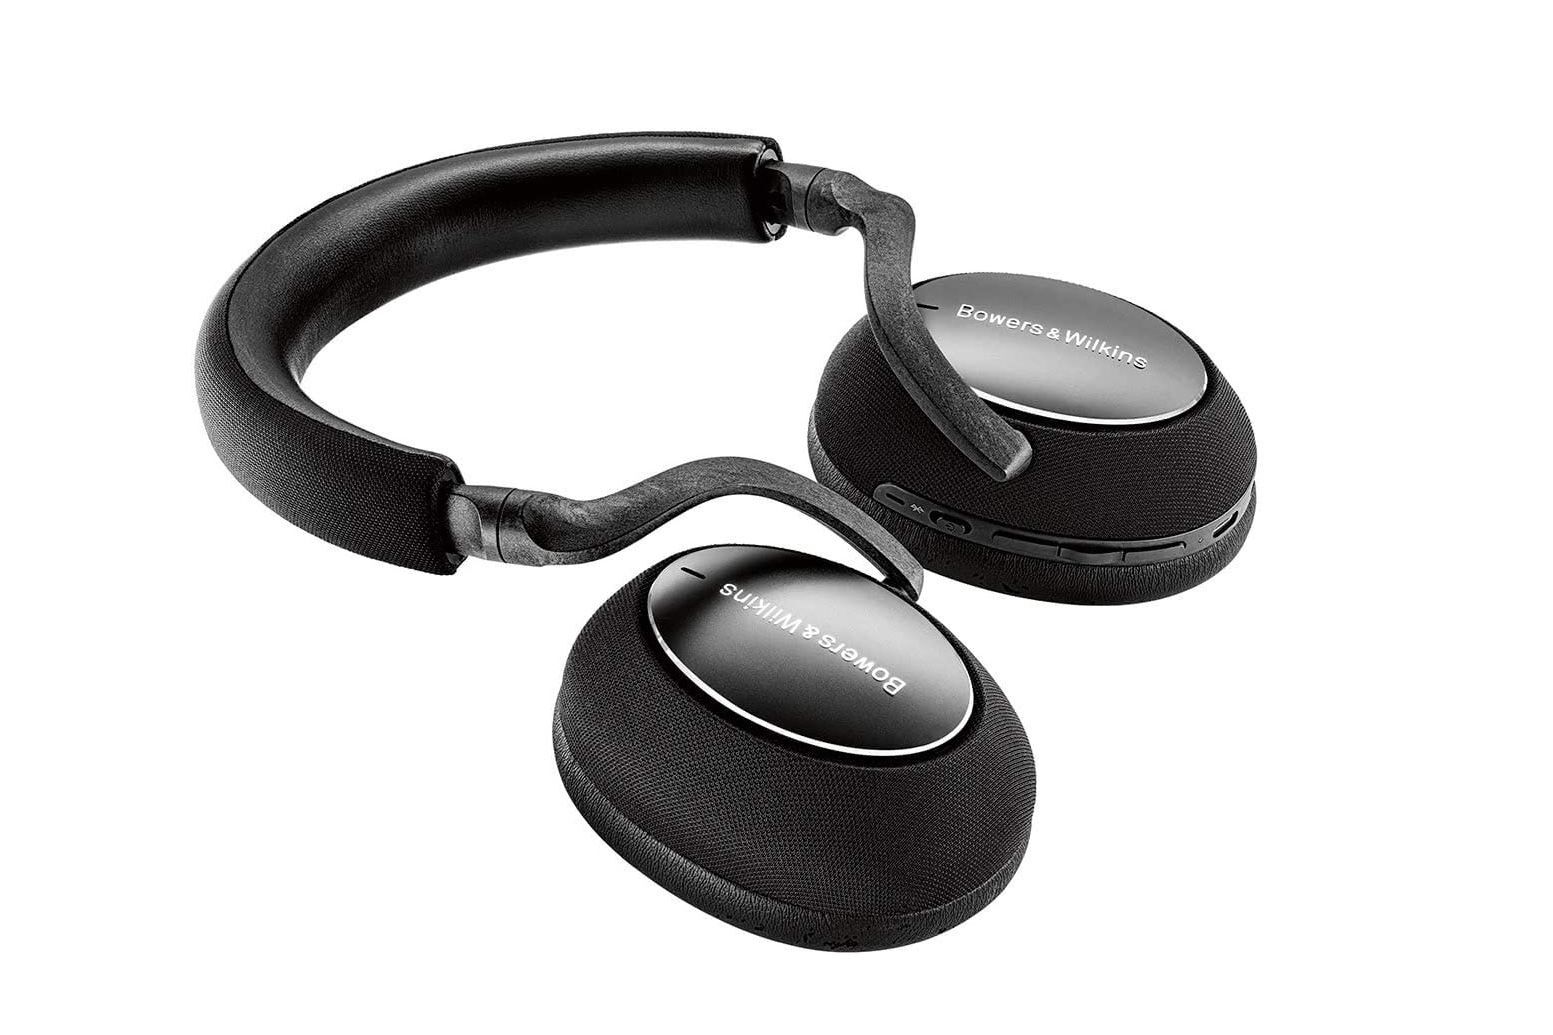 Save $100 on a pair of audiophile headphones right now!